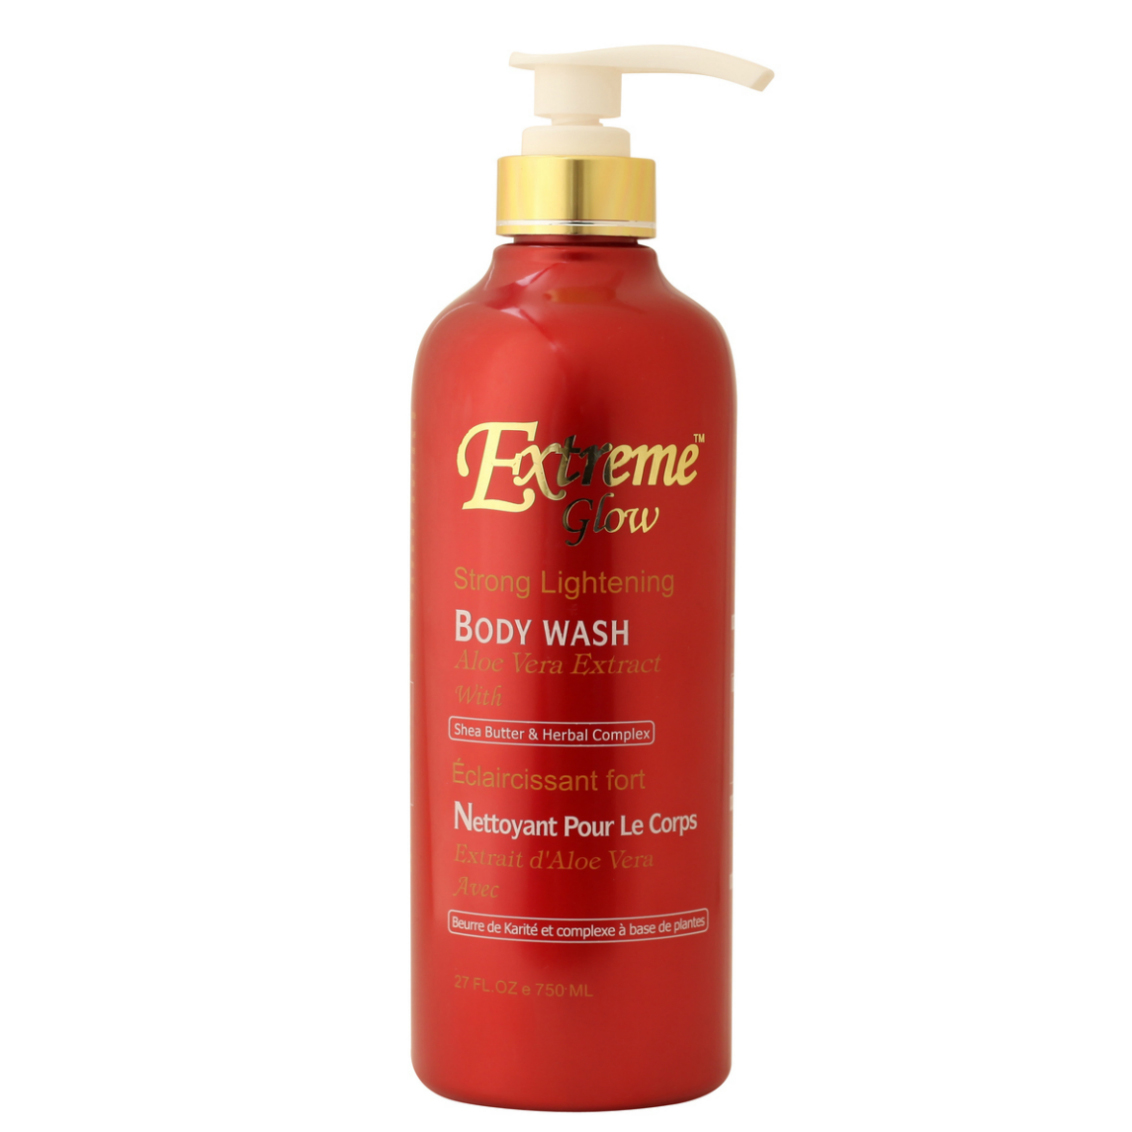 EXTREME GLOW ® Strong Lightening Body Wash.